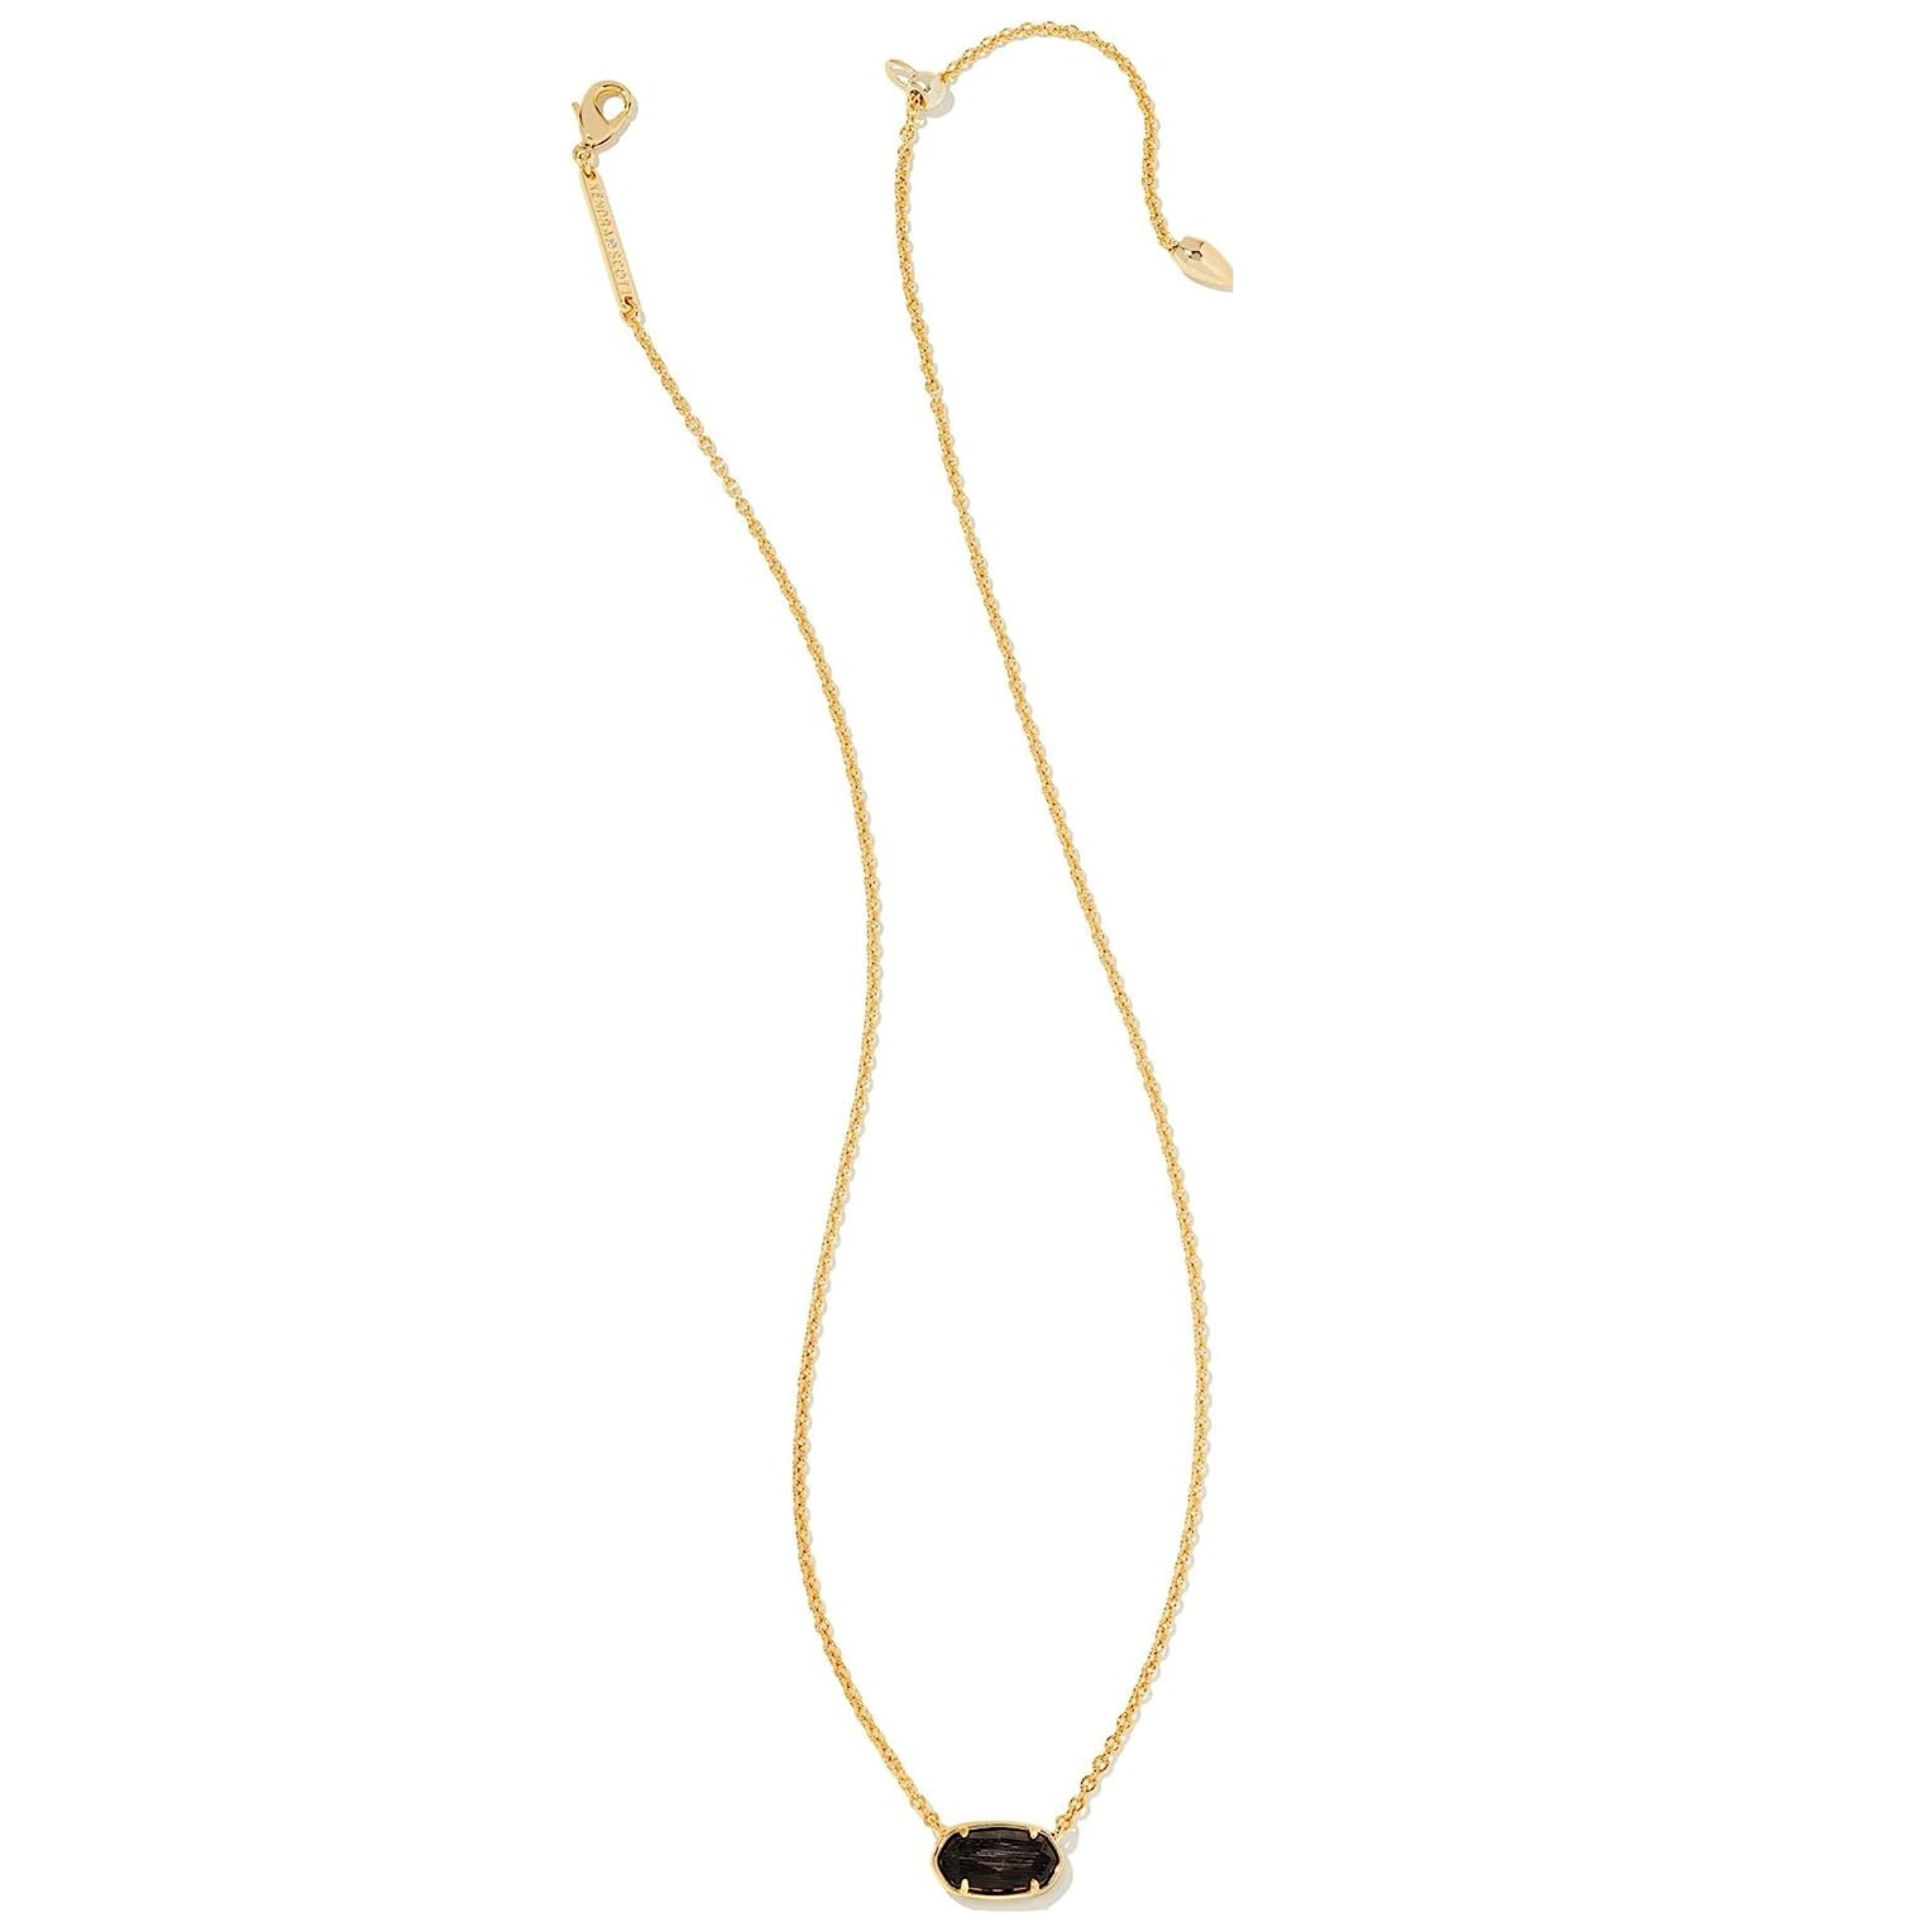 Kendra Scott | Grayson Gold Pendant Necklace in Black Cats Eye - Giddy Up Glamour Boutique